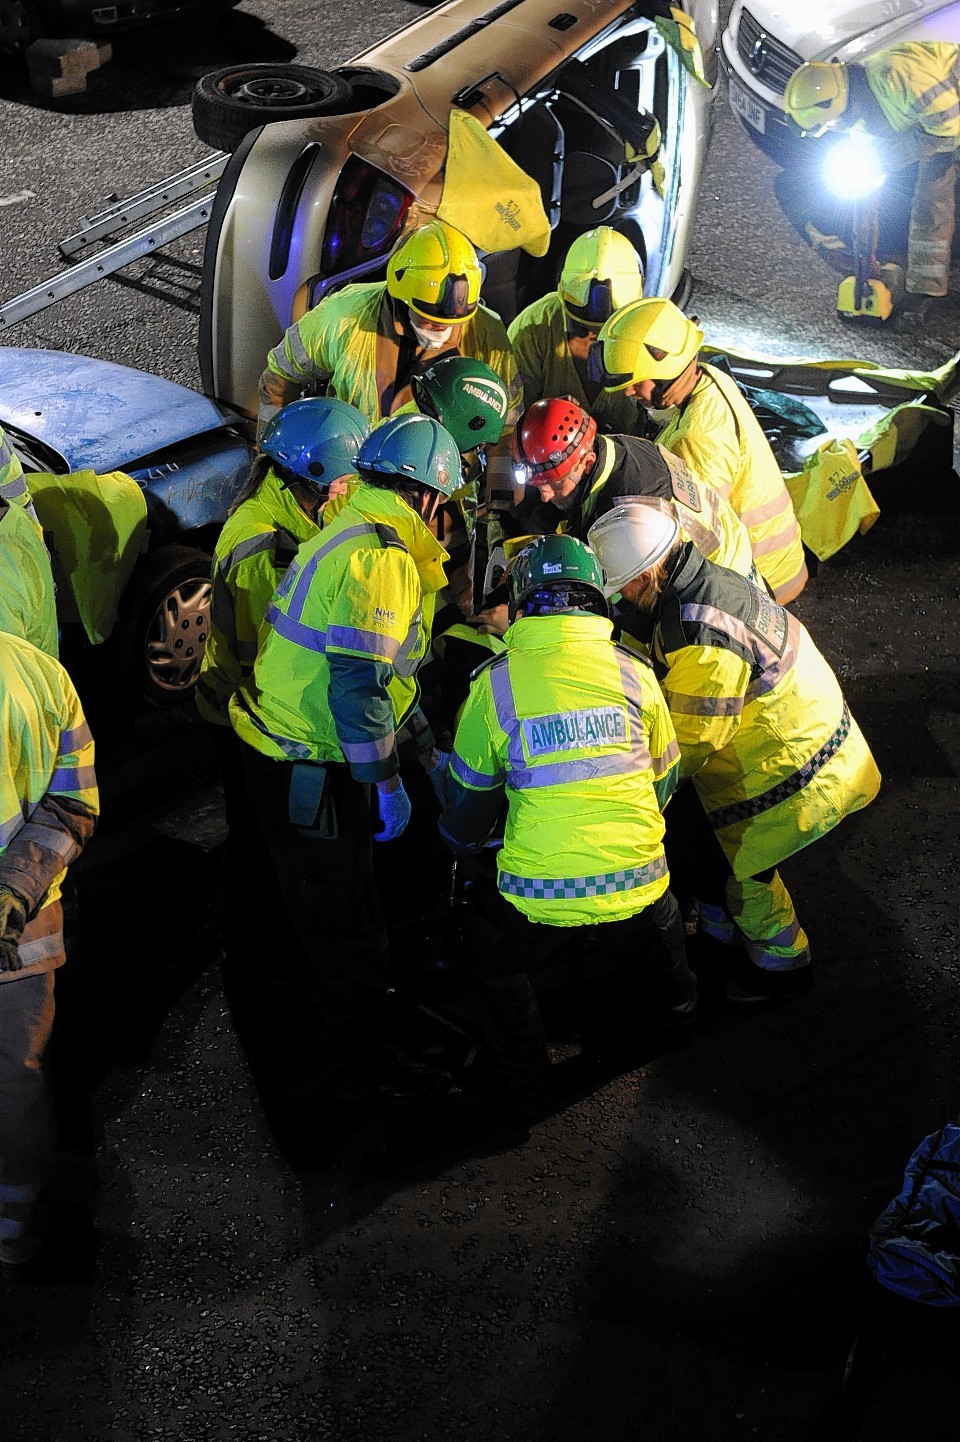 Emergency exercise in Moray